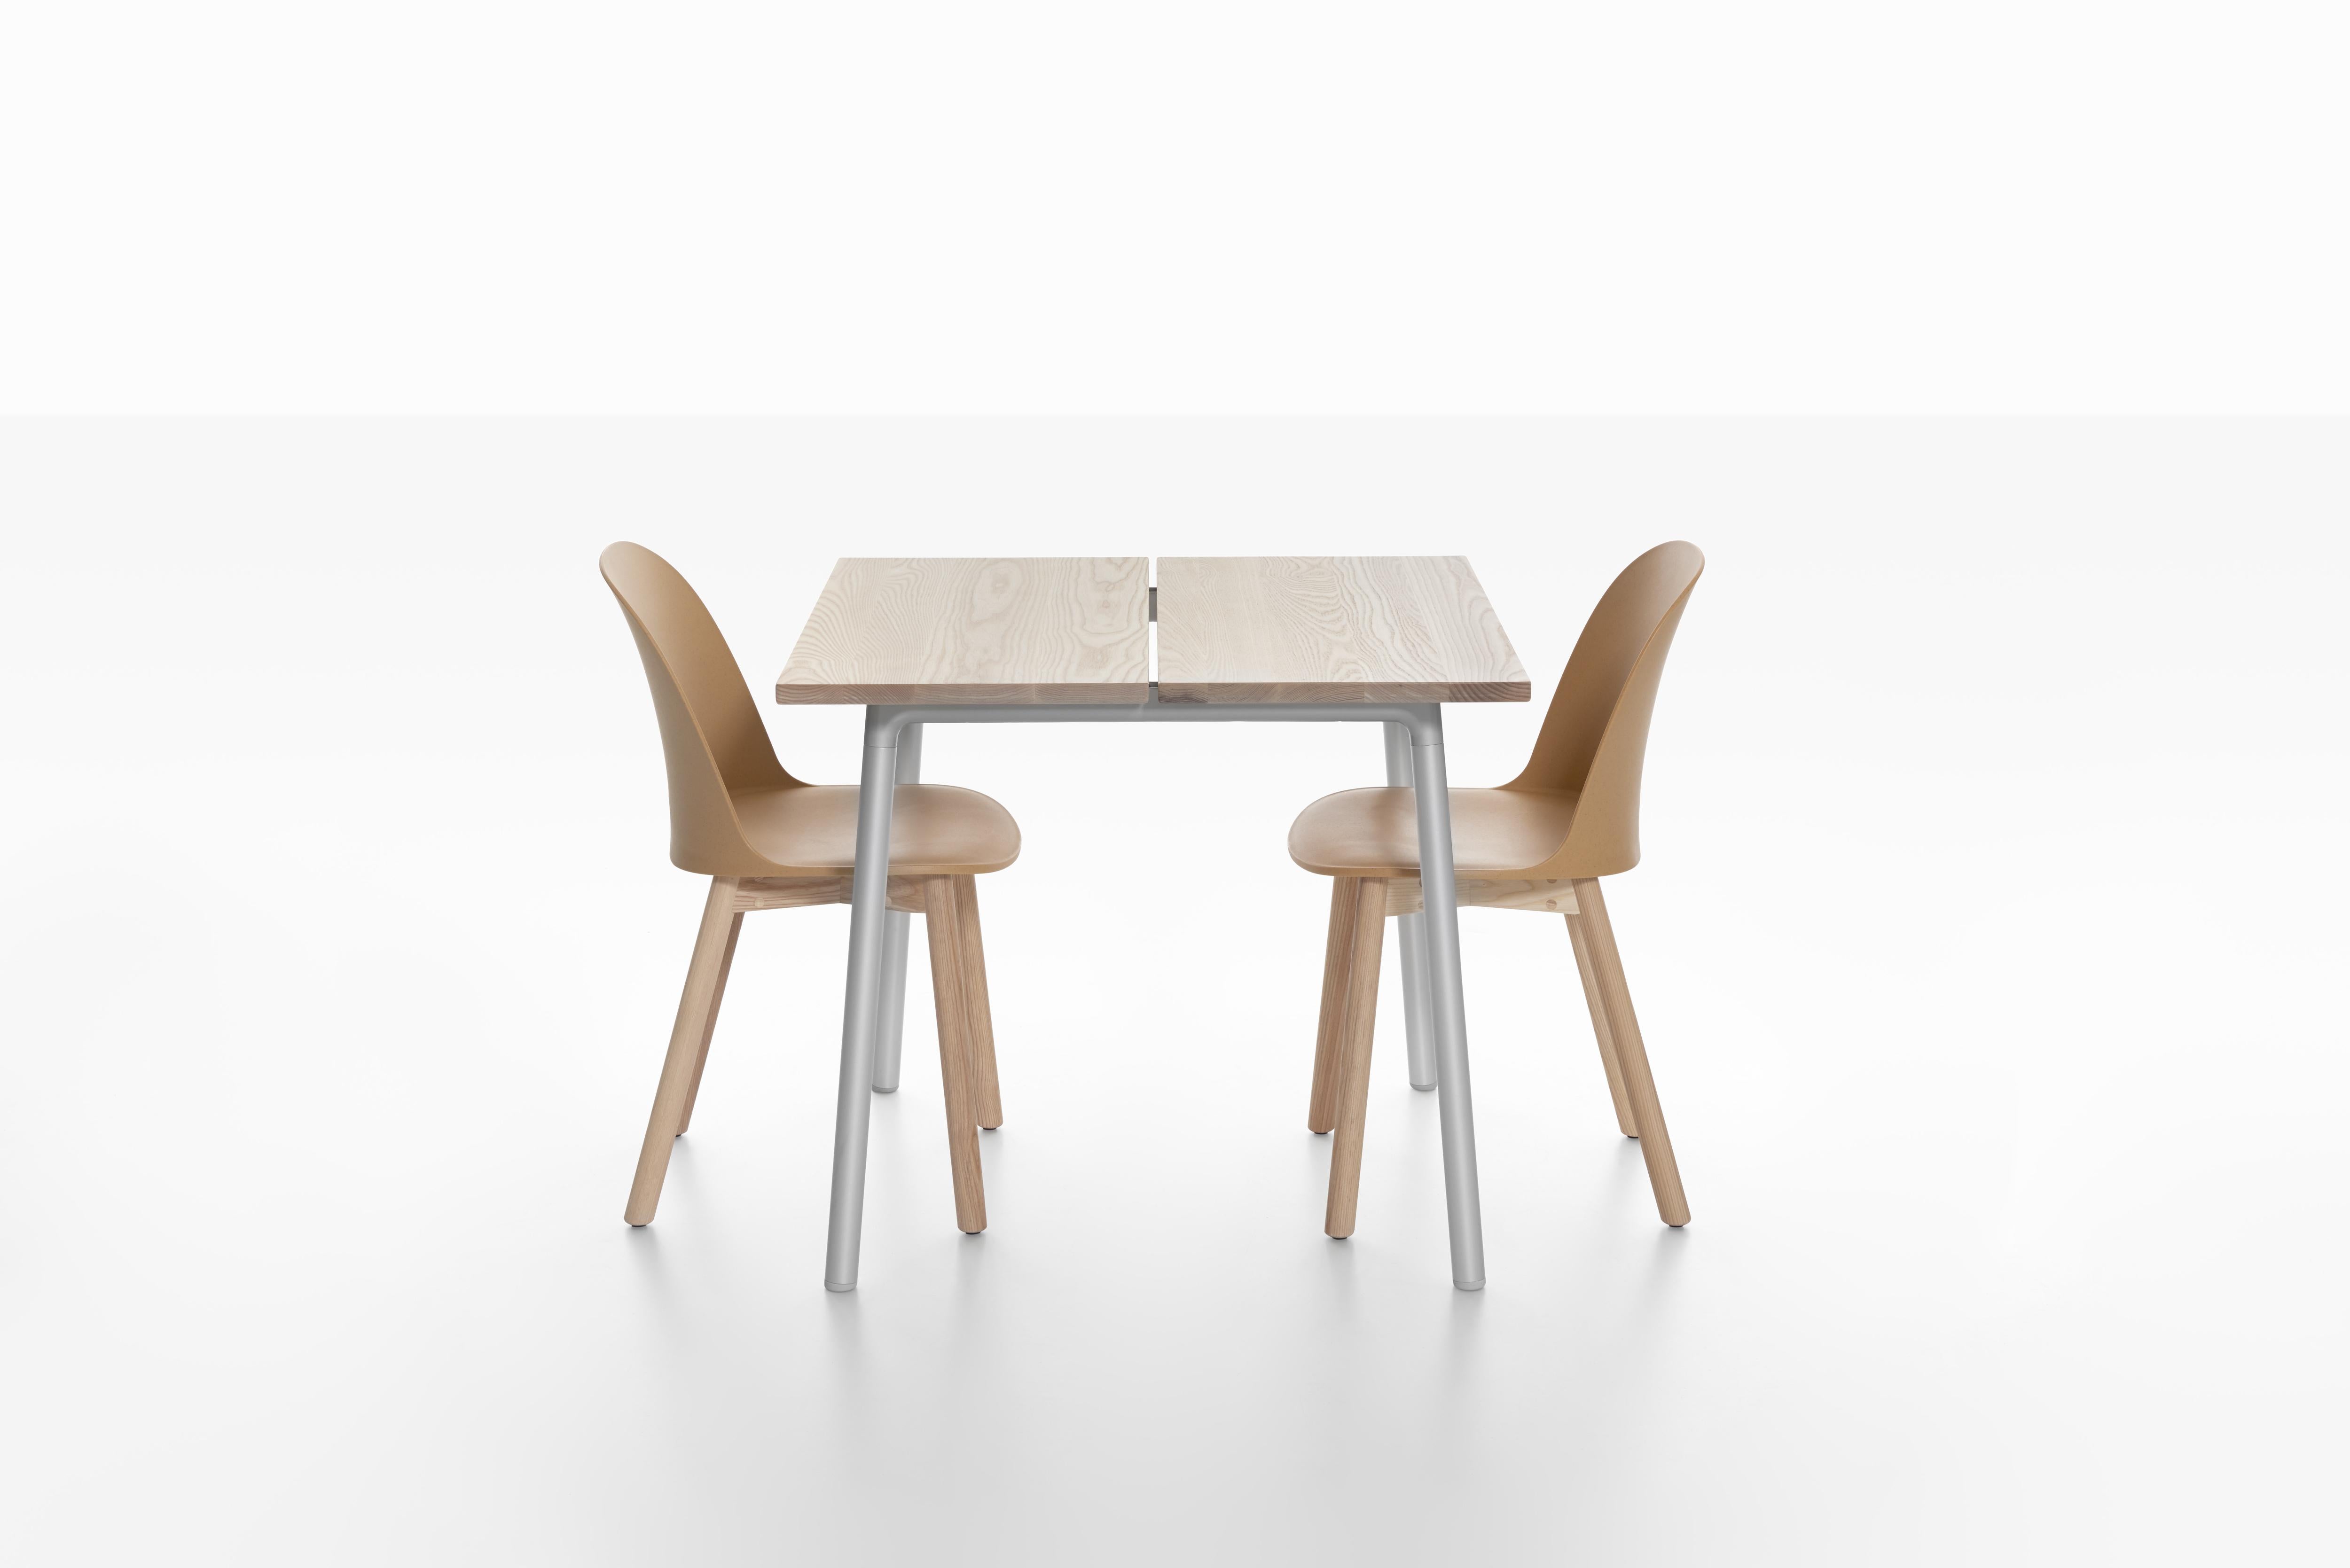 Emeco Run XL High Table in Clear Anodized & Walnut by Sam Hecht + Kim Colin In New Condition For Sale In Hanover, PA